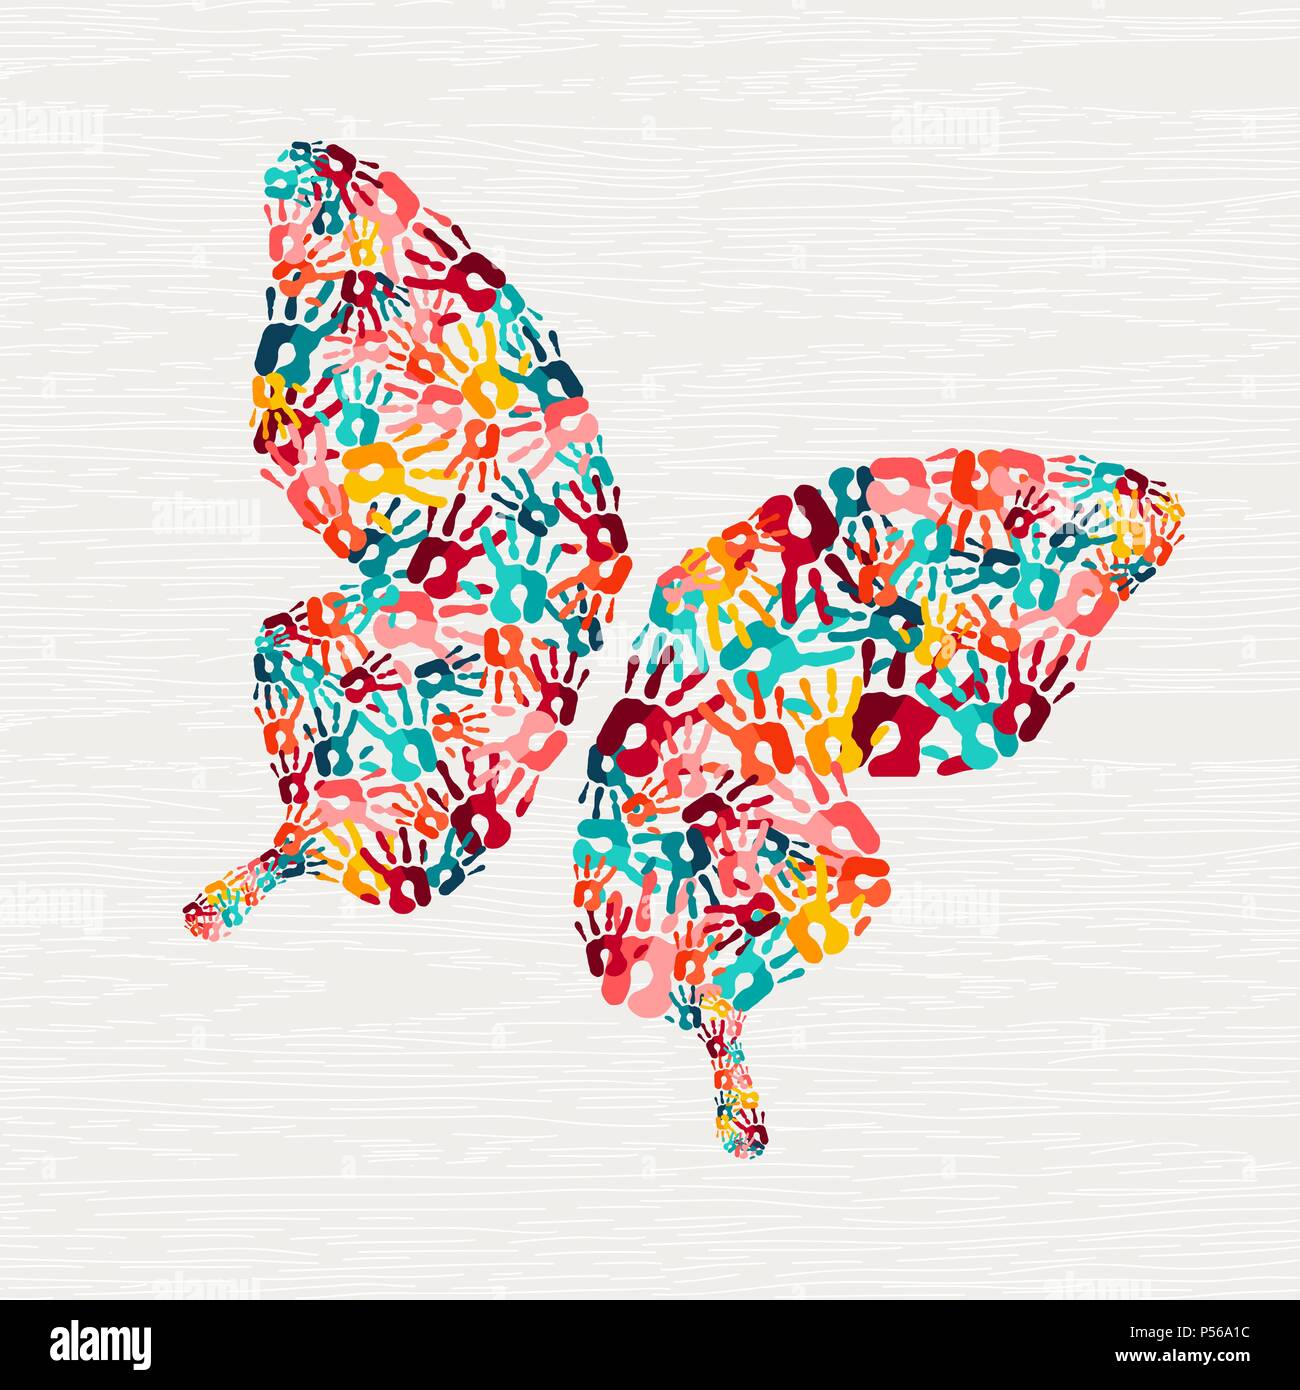 Human hand print butterfly shape concept. Colorful paint handprint background for diverse community or social project. EPS10 vector. Stock Vector